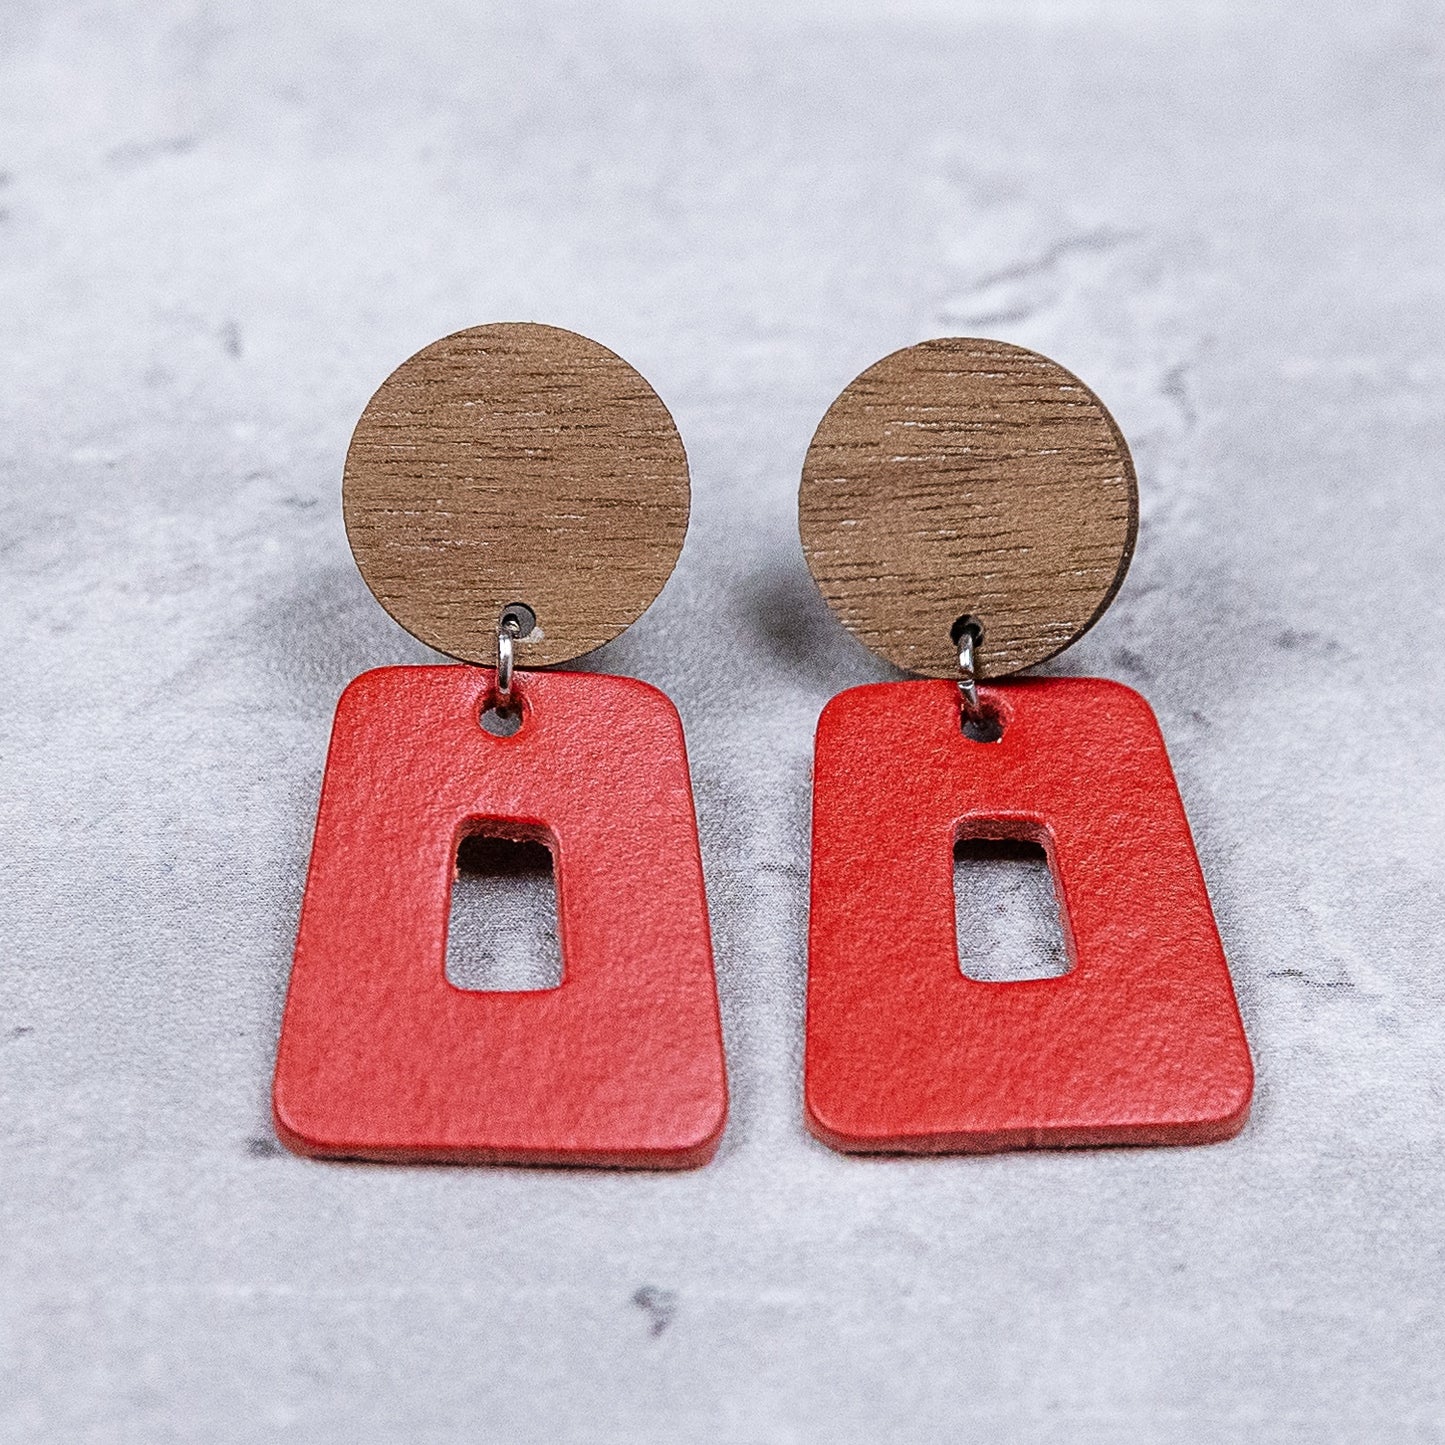 THE SUE in Red/ Leather + Wood Statement Earrings